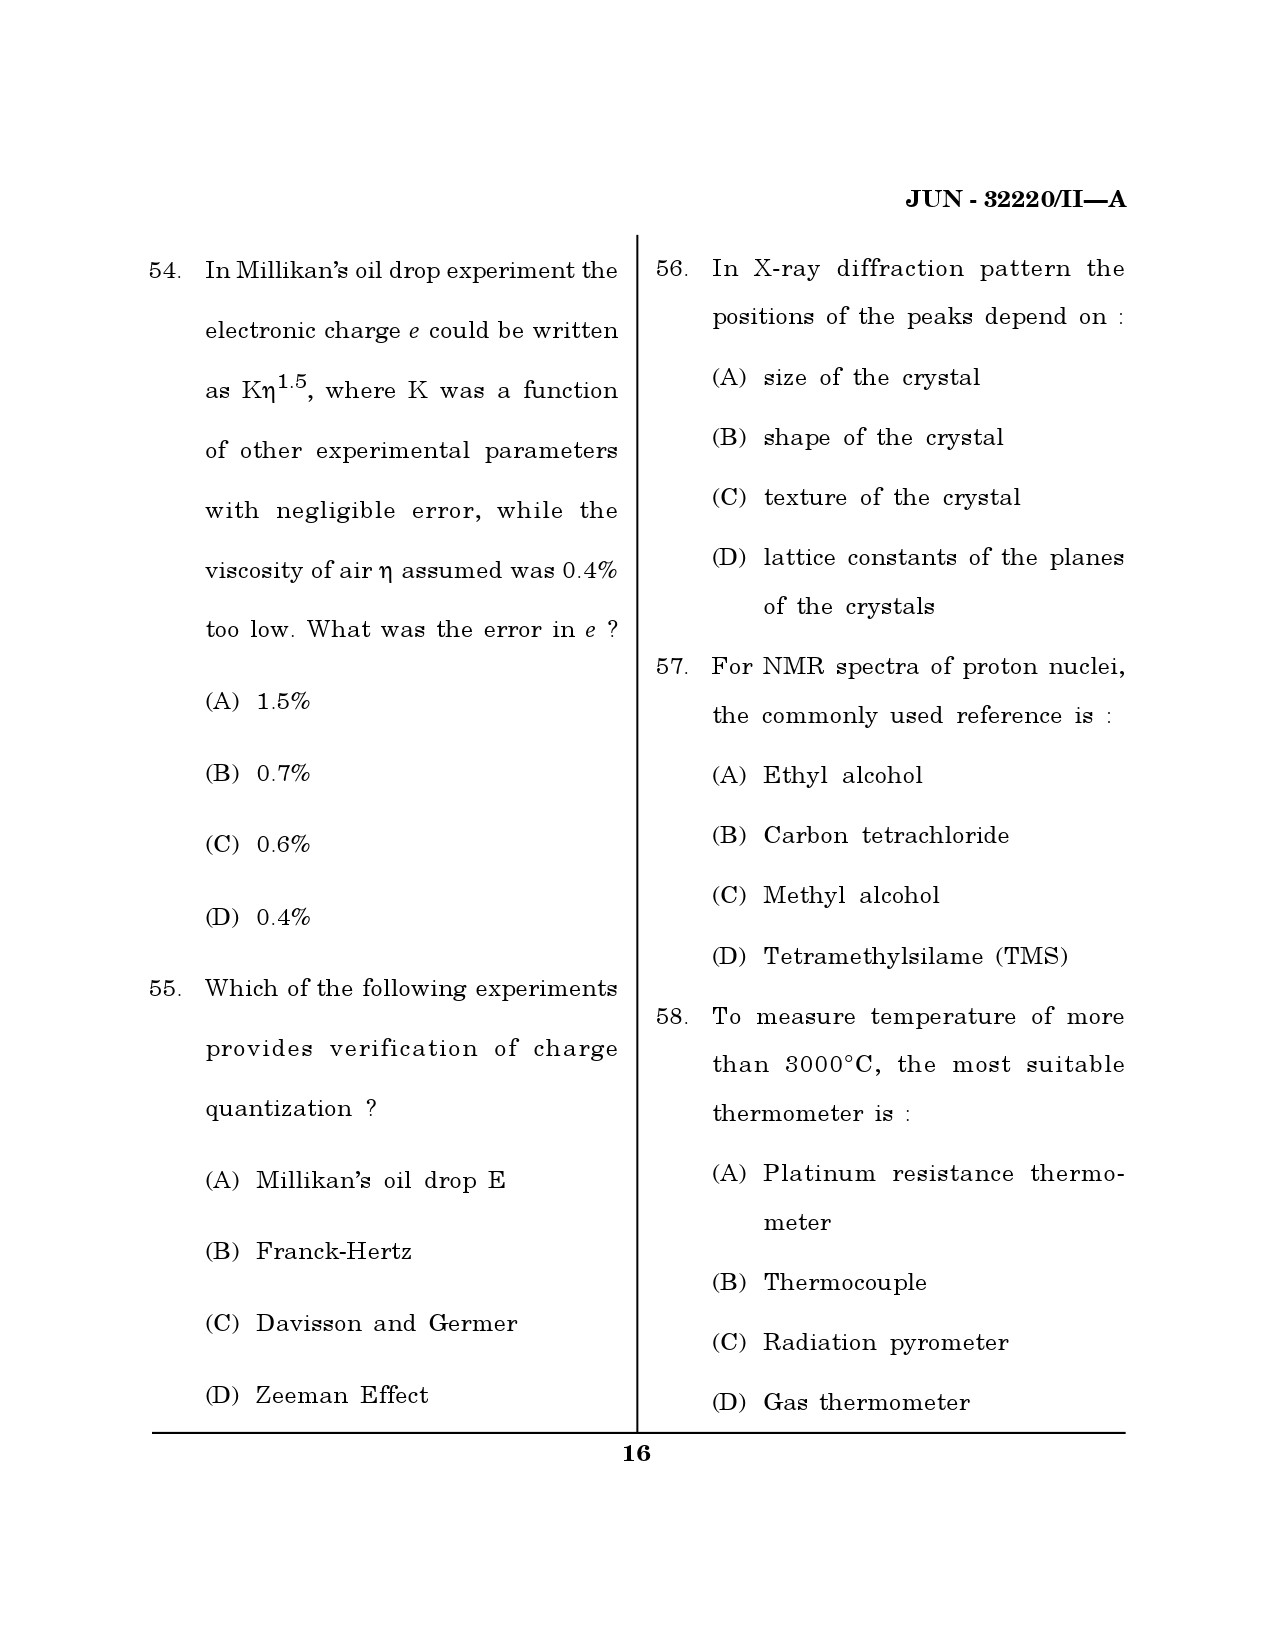 Maharashtra SET Physical Science Question Paper II June 2020 15